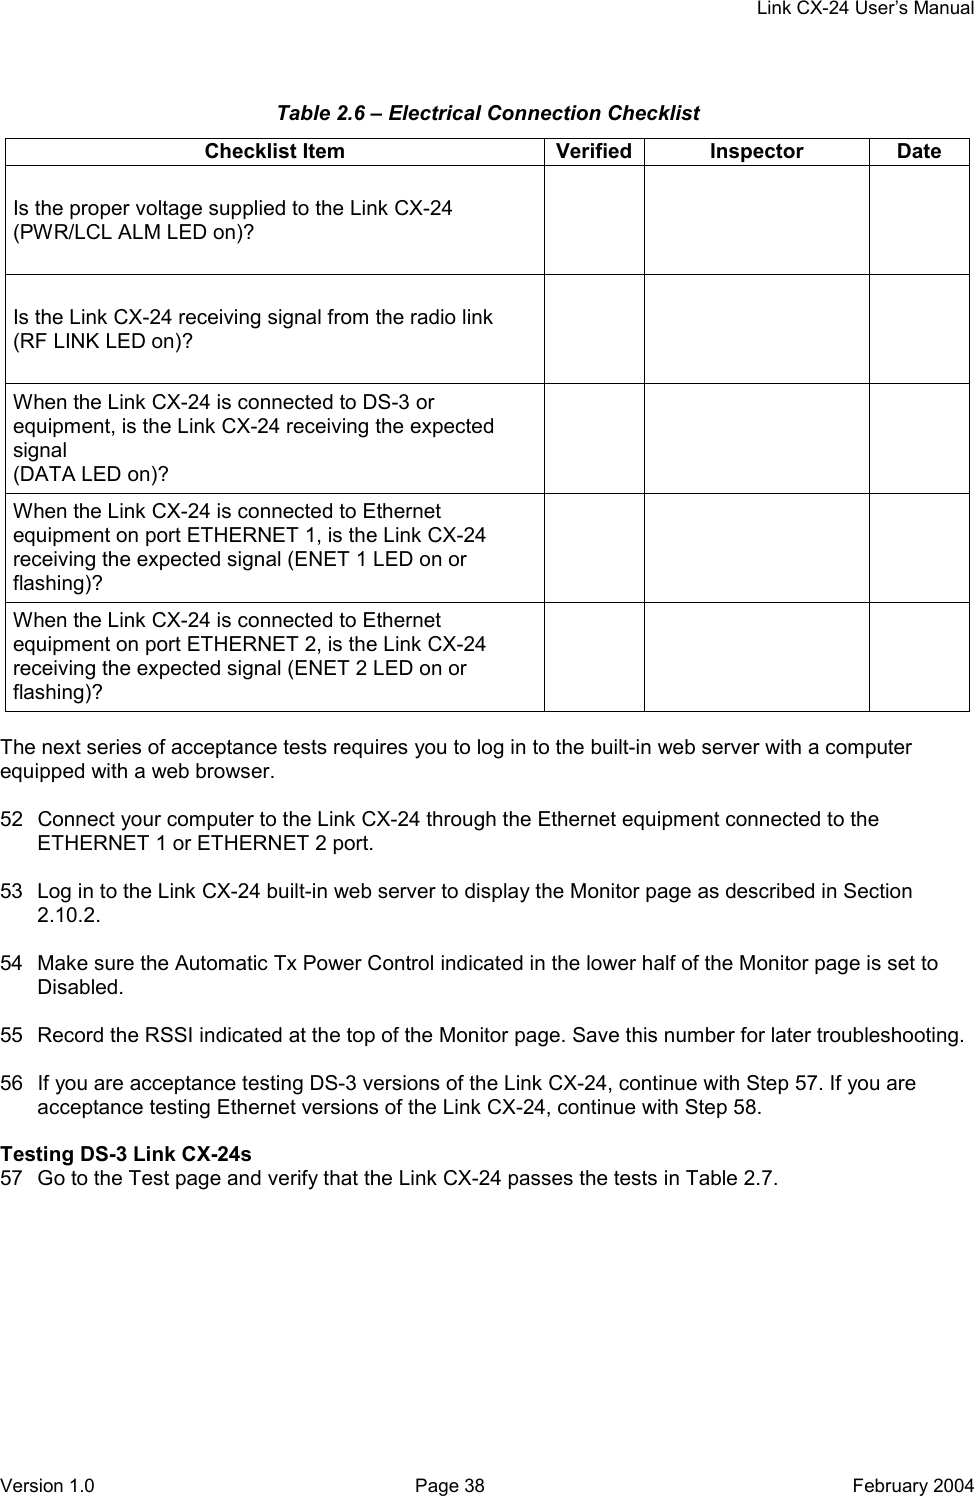     Link CX-24 User’s Manual Version 1.0  Page 38  February 2004 Table 2.6 – Electrical Connection Checklist Checklist Item  Verified Inspector  Date Is the proper voltage supplied to the Link CX-24 (PWR/LCL ALM LED on)?      Is the Link CX-24 receiving signal from the radio link (RF LINK LED on)?      When the Link CX-24 is connected to DS-3 or equipment, is the Link CX-24 receiving the expected signal (DATA LED on)?     When the Link CX-24 is connected to Ethernet equipment on port ETHERNET 1, is the Link CX-24 receiving the expected signal (ENET 1 LED on or flashing)?     When the Link CX-24 is connected to Ethernet equipment on port ETHERNET 2, is the Link CX-24 receiving the expected signal (ENET 2 LED on or flashing)?      The next series of acceptance tests requires you to log in to the built-in web server with a computer equipped with a web browser.  52  Connect your computer to the Link CX-24 through the Ethernet equipment connected to the ETHERNET 1 or ETHERNET 2 port.  53  Log in to the Link CX-24 built-in web server to display the Monitor page as described in Section 2.10.2.  54  Make sure the Automatic Tx Power Control indicated in the lower half of the Monitor page is set to Disabled.  55  Record the RSSI indicated at the top of the Monitor page. Save this number for later troubleshooting.  56  If you are acceptance testing DS-3 versions of the Link CX-24, continue with Step 57. If you are acceptance testing Ethernet versions of the Link CX-24, continue with Step 58.  Testing DS-3 Link CX-24s 57  Go to the Test page and verify that the Link CX-24 passes the tests in Table 2.7. 